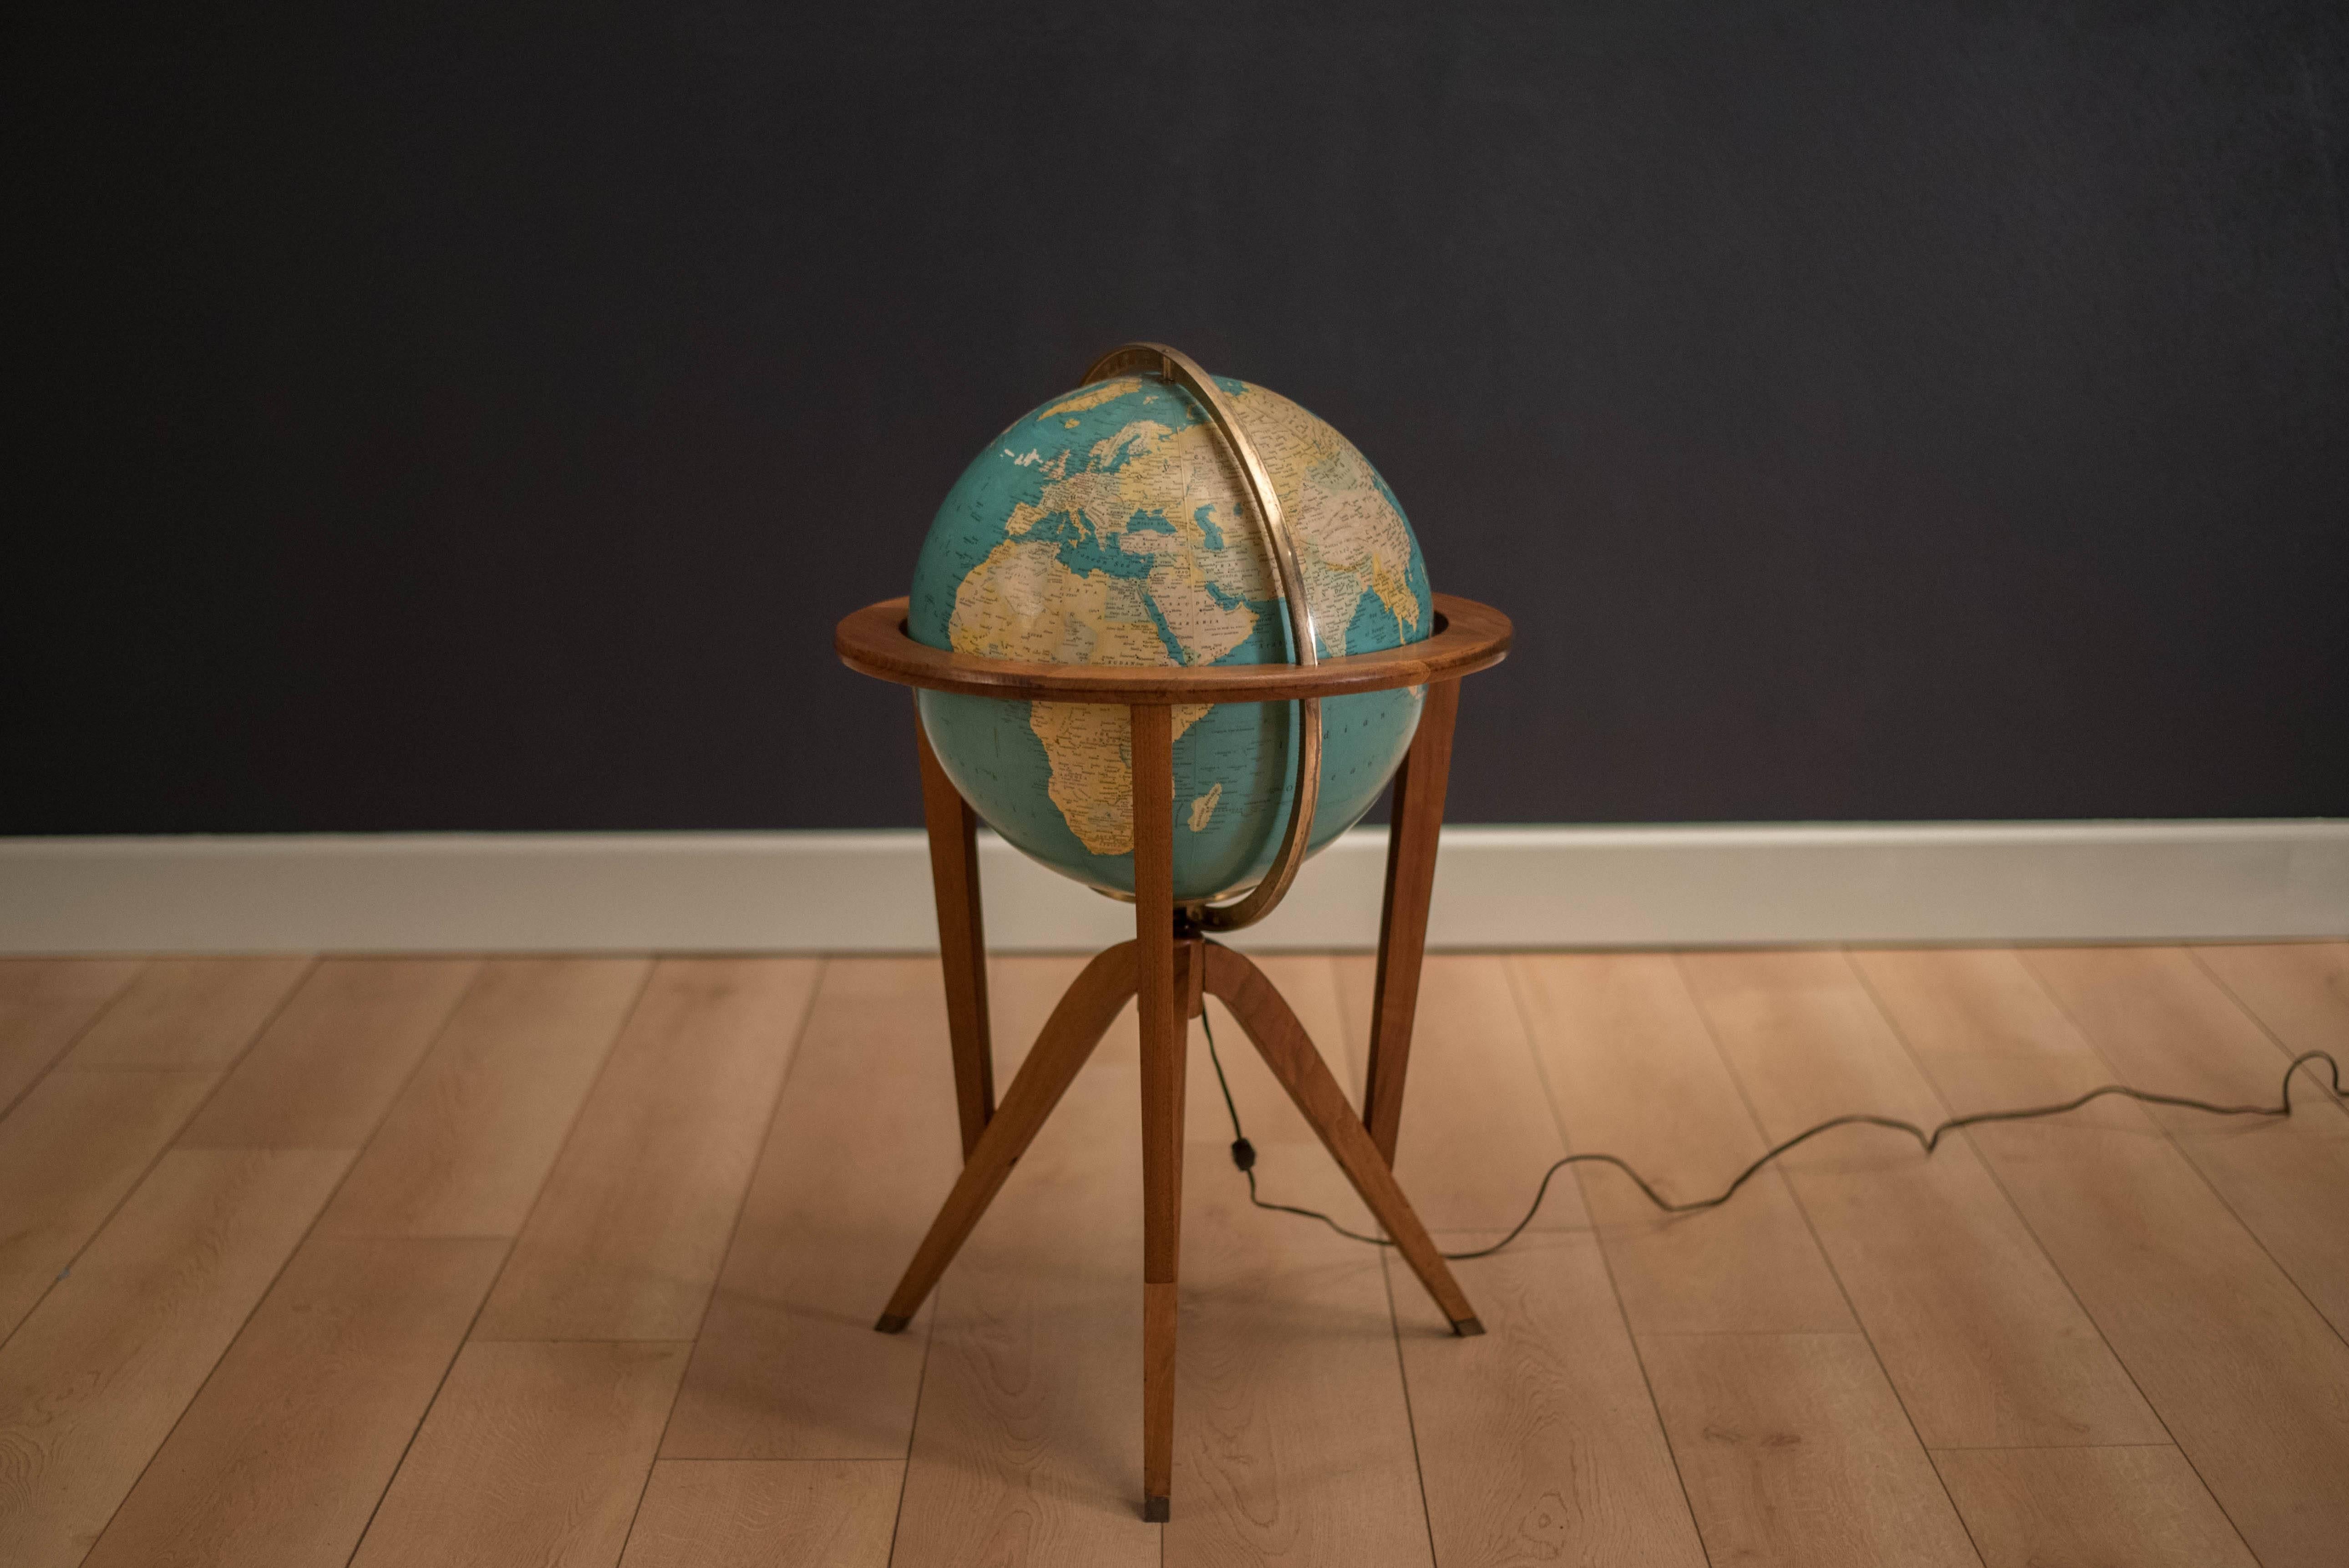 Vintage globe stand designed by Edward Wormley for Dunbar, circa 1950s. This piece features a rotating light up globe made with a solid walnut stand. 

